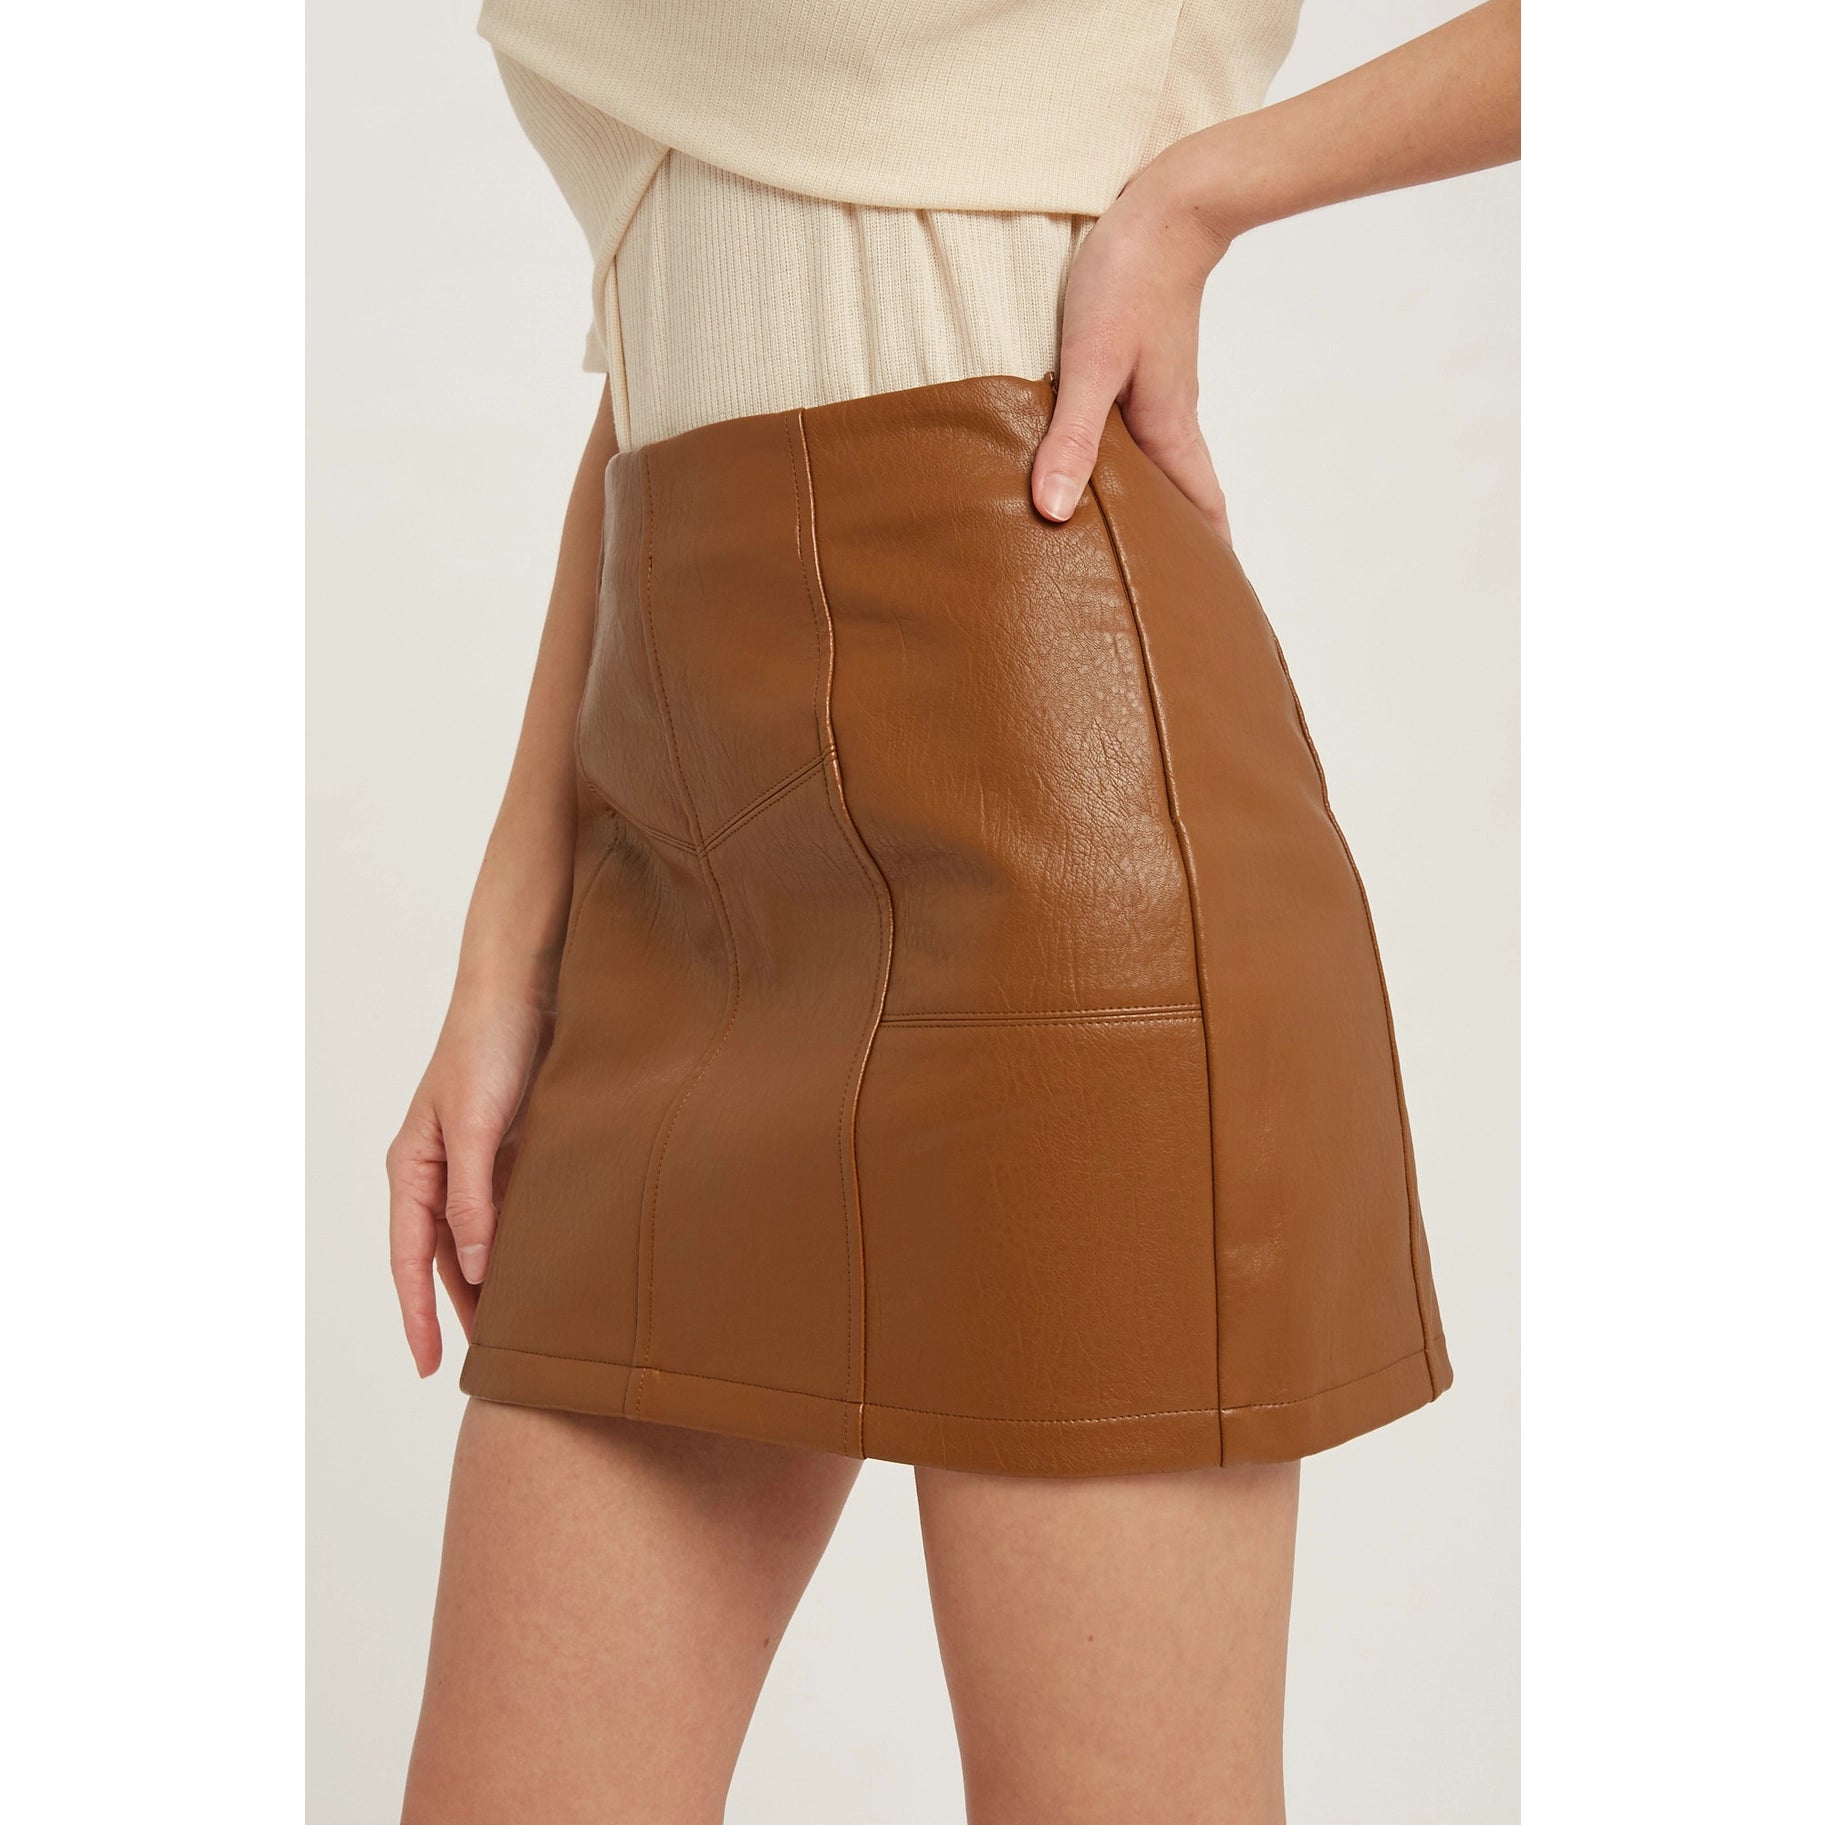 The Faux Leather Mini Skirt - Milly's Boutique